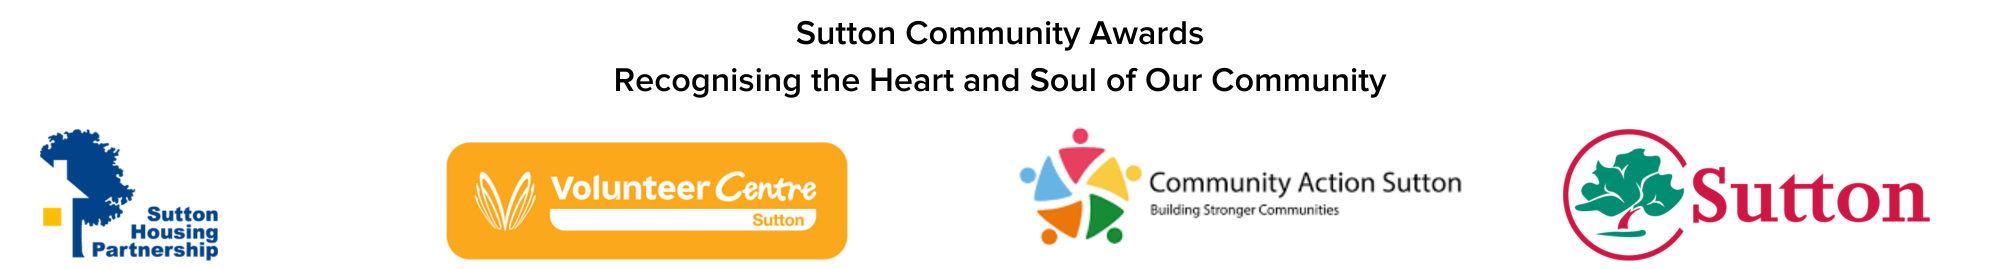 White background with logos across the bottom. Sutton housing partnership logo, Volunteer centre sutton logo, community action sutton logo and sutton council logo. Text reads Sutton community awards, recognising the heart and soul of our community